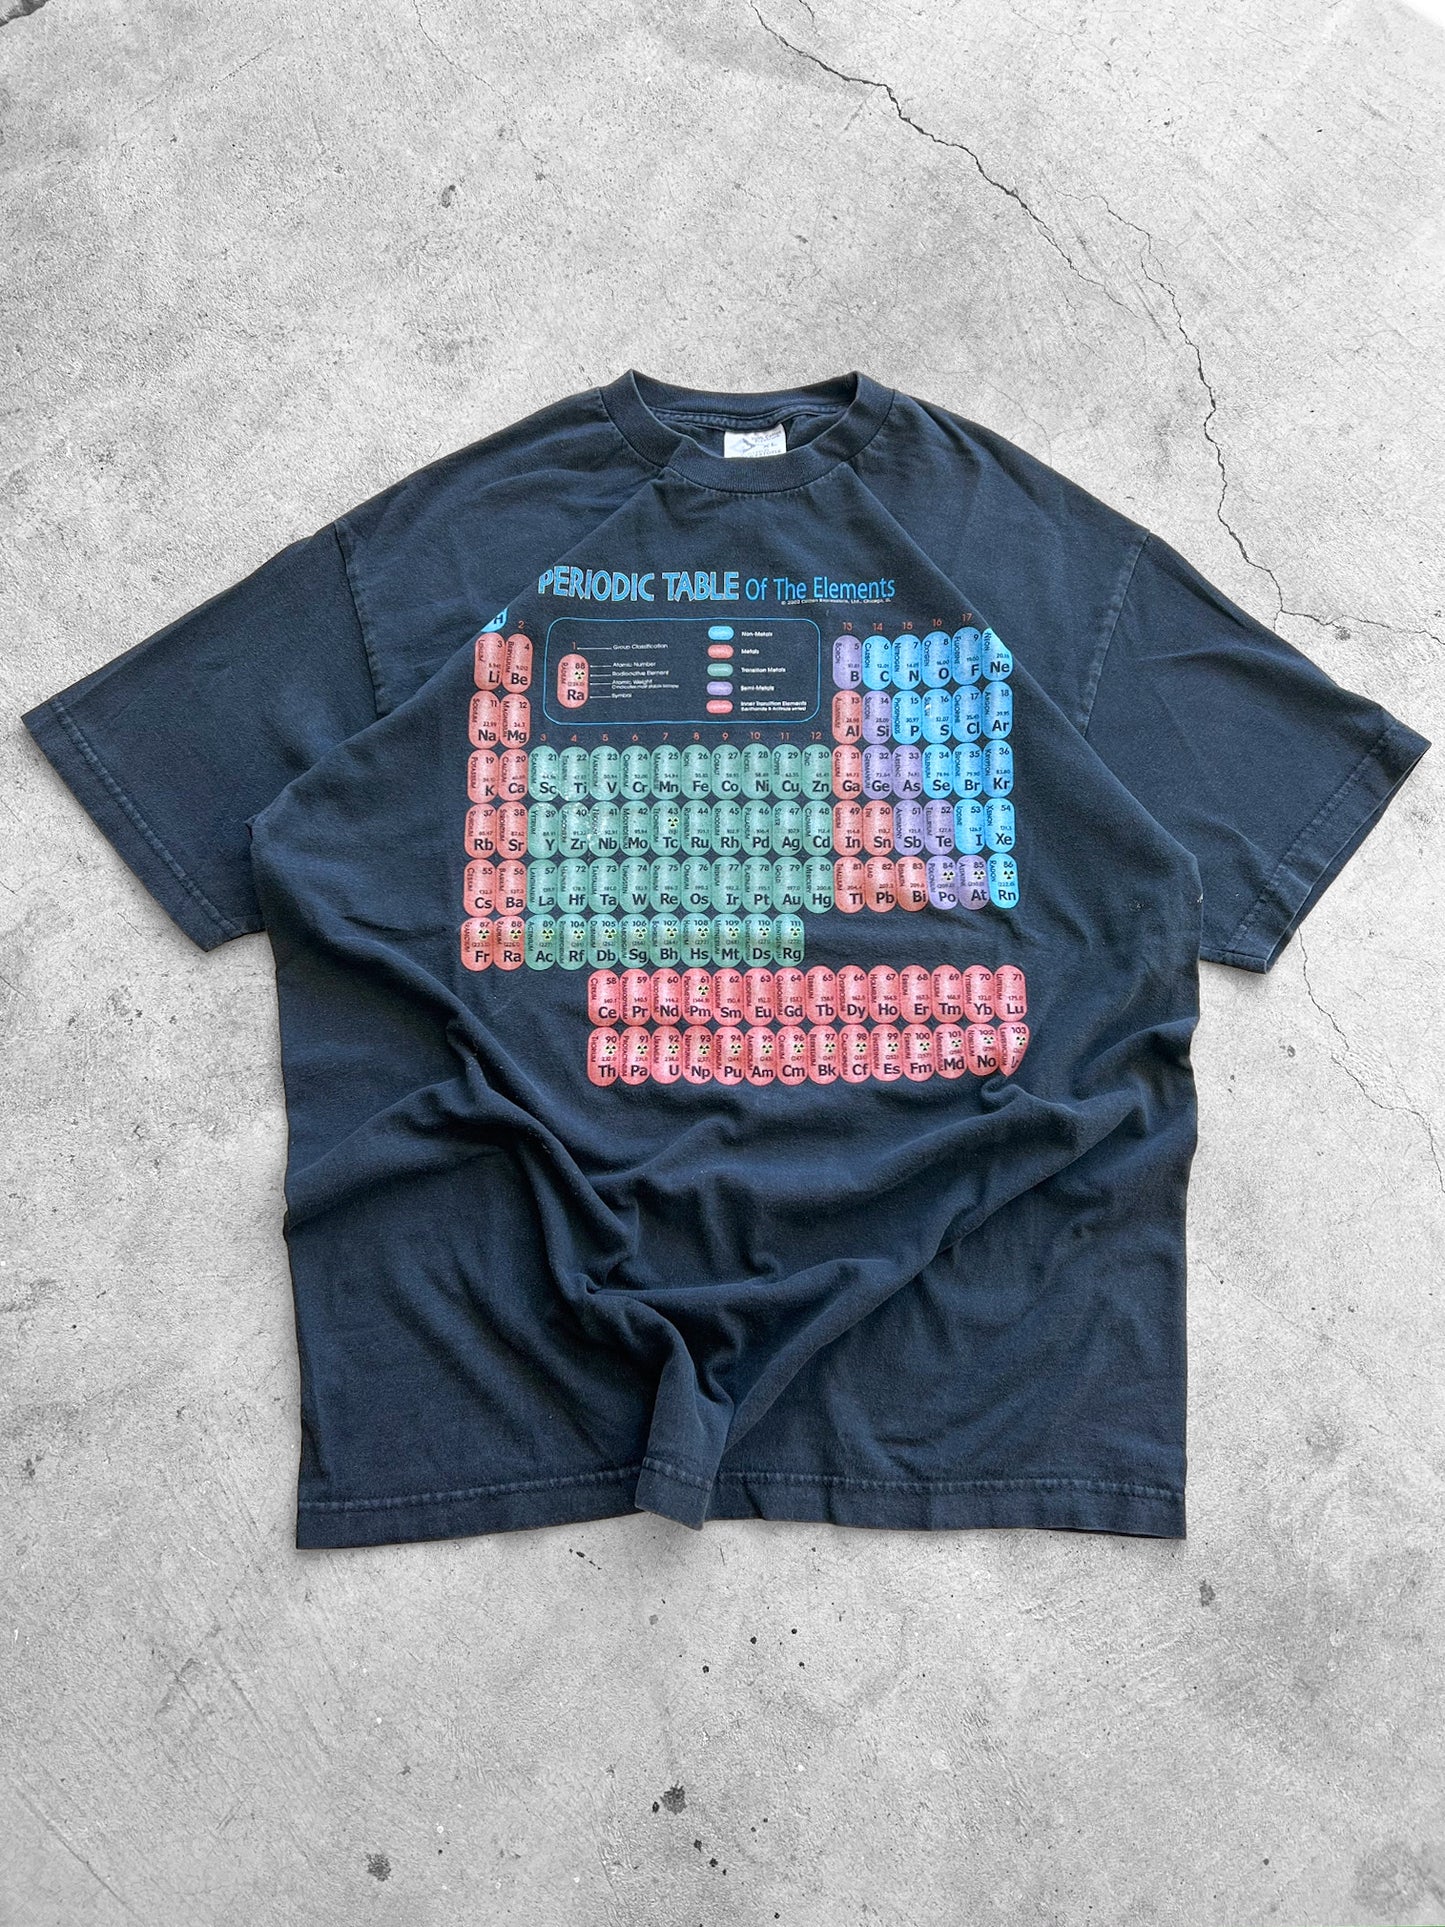 90’s Periodic Table of Elements Shirt - XL